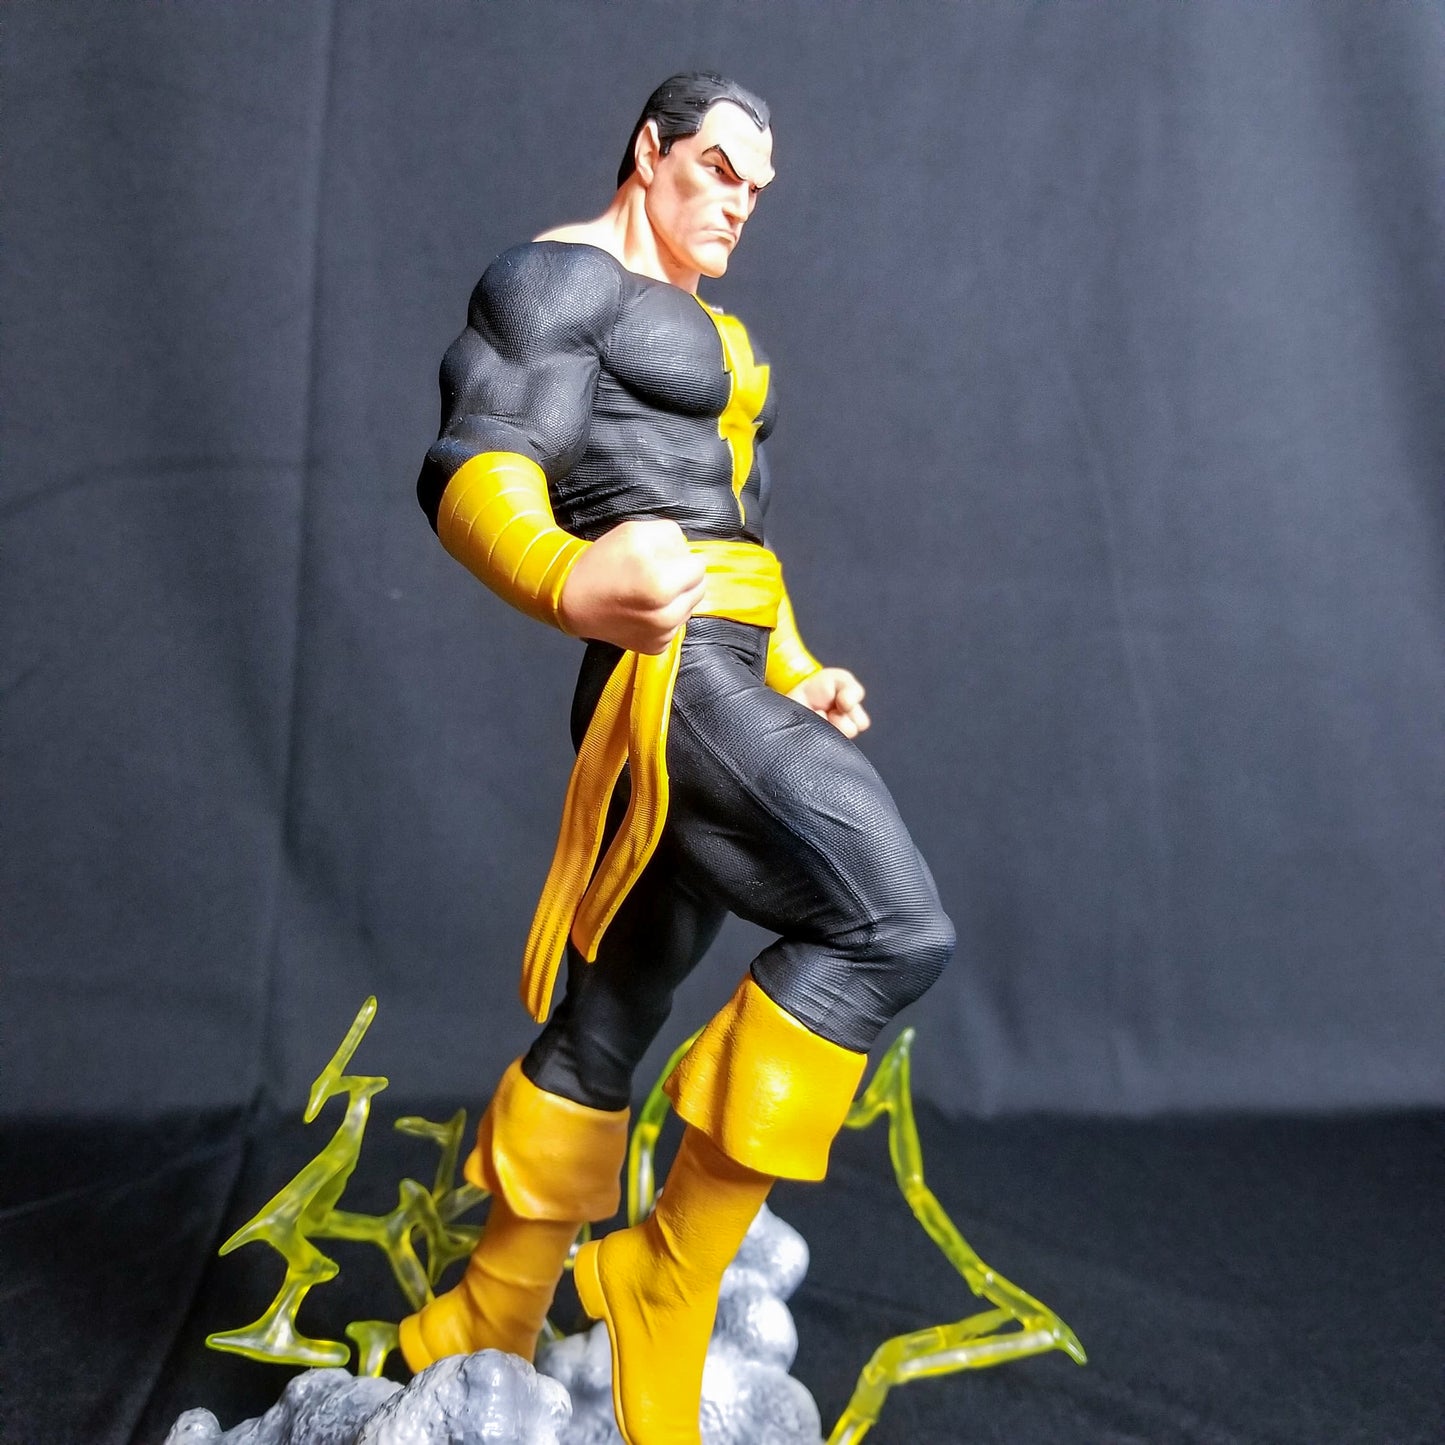 Load image into Gallery viewer, Getting ready for his big-screen debut, Black Adam smashes his way out of the Shazam/Captain Marvel mythos and into the DC Gallery Diorama line of sculptures! Hovering above the ground with lightning crackling around him, this approximately 11-inch sculpture of Teth-Adam features a removable cape, and is made of high-quality PVC with detailed sculpting and paint applications.
